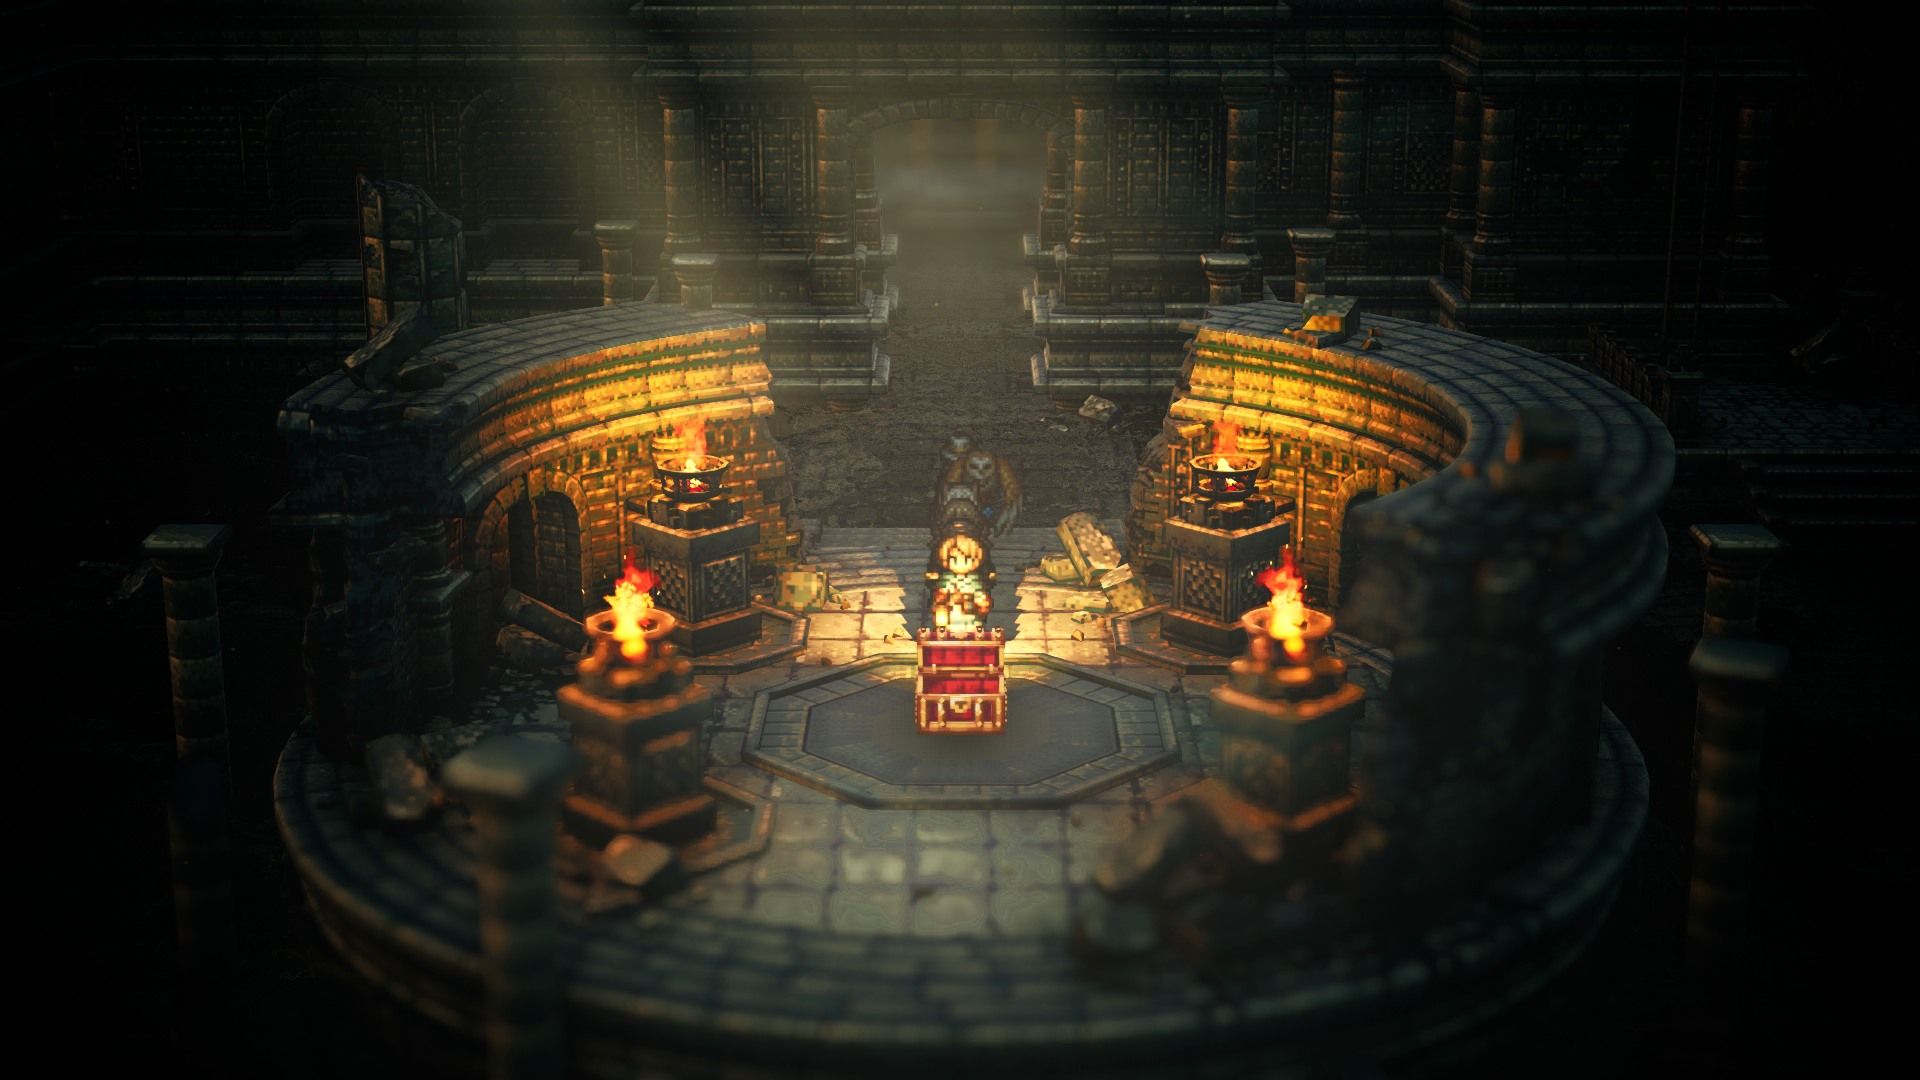 Octopath Traveler 2 Seat of the Water Sprite